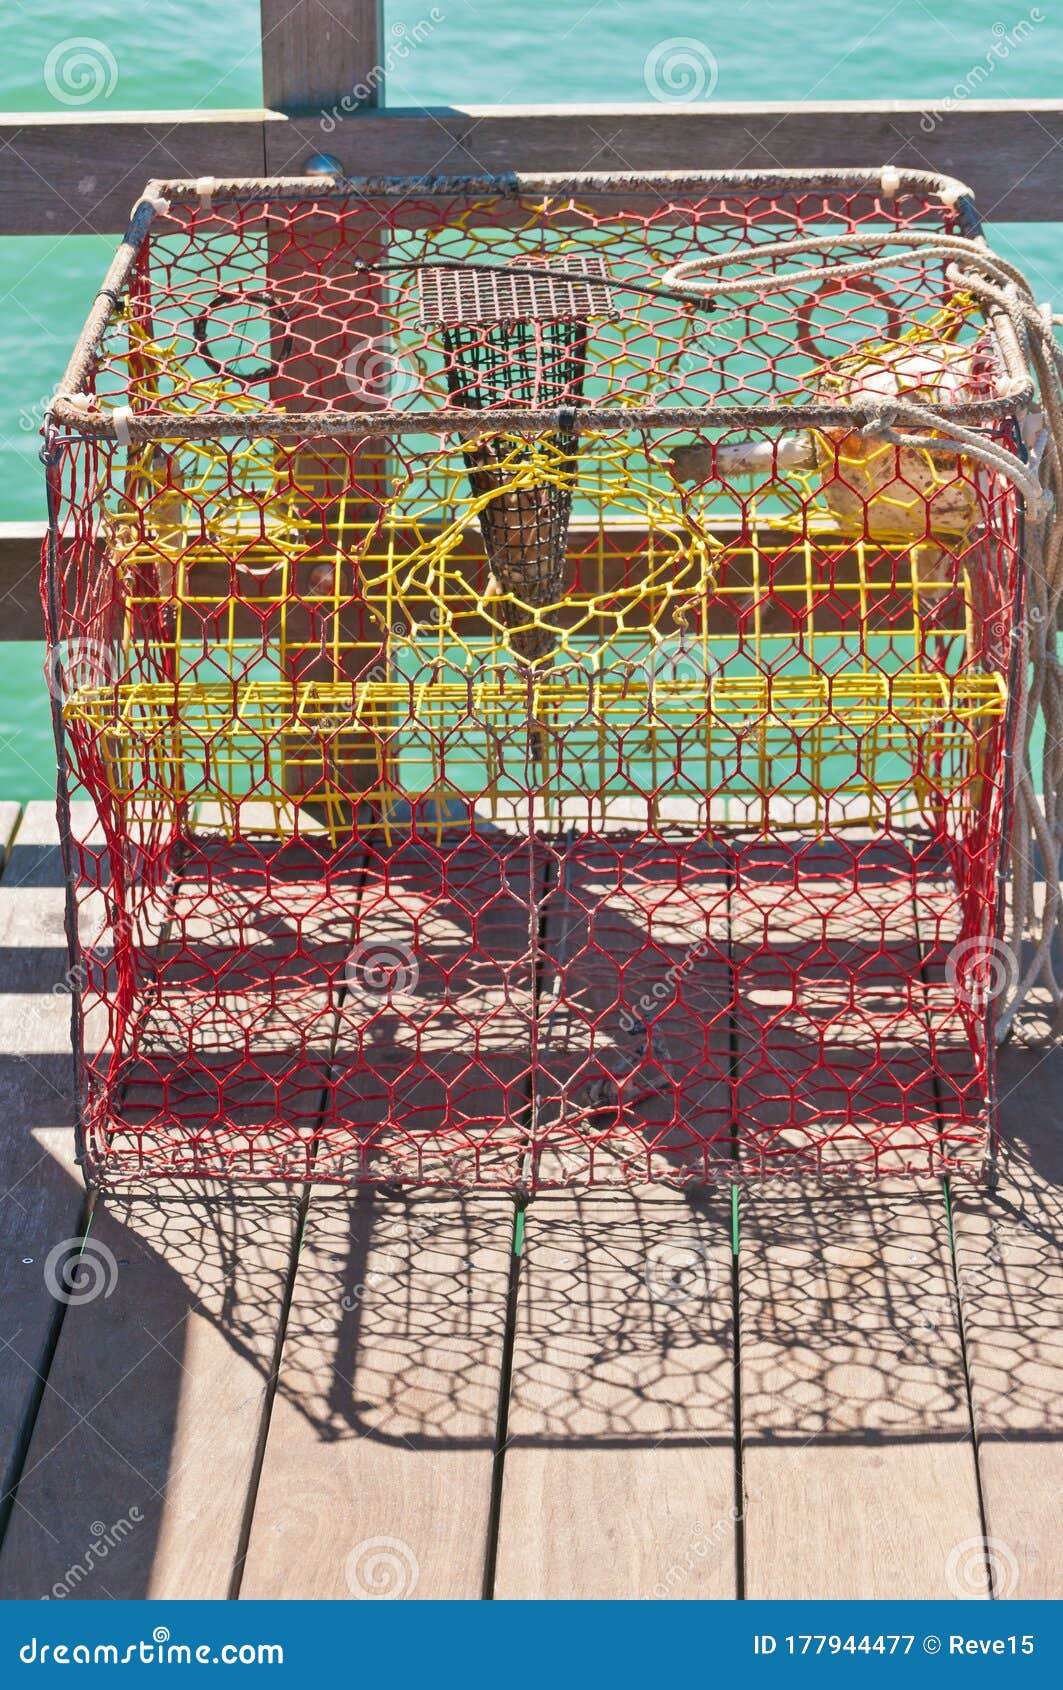 Crab Trap with Bait on Wood Pier Stock Image - Image of tropical, winter:  177944477